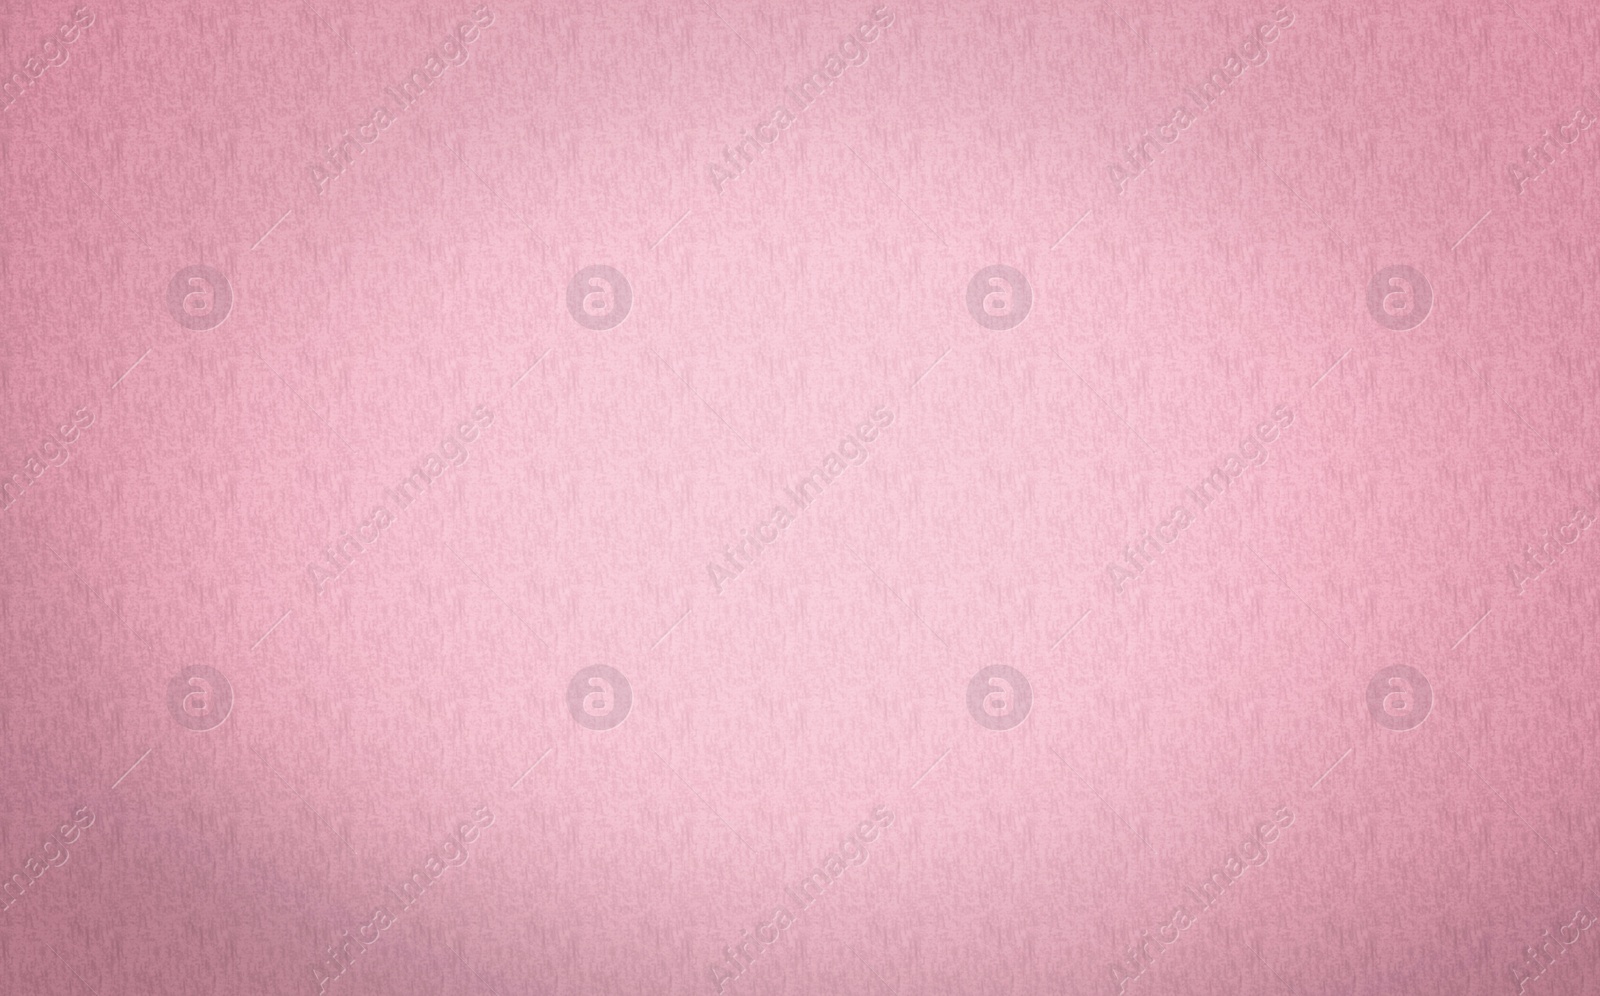 Image of Abstract pink background with pattern. Wall paper design